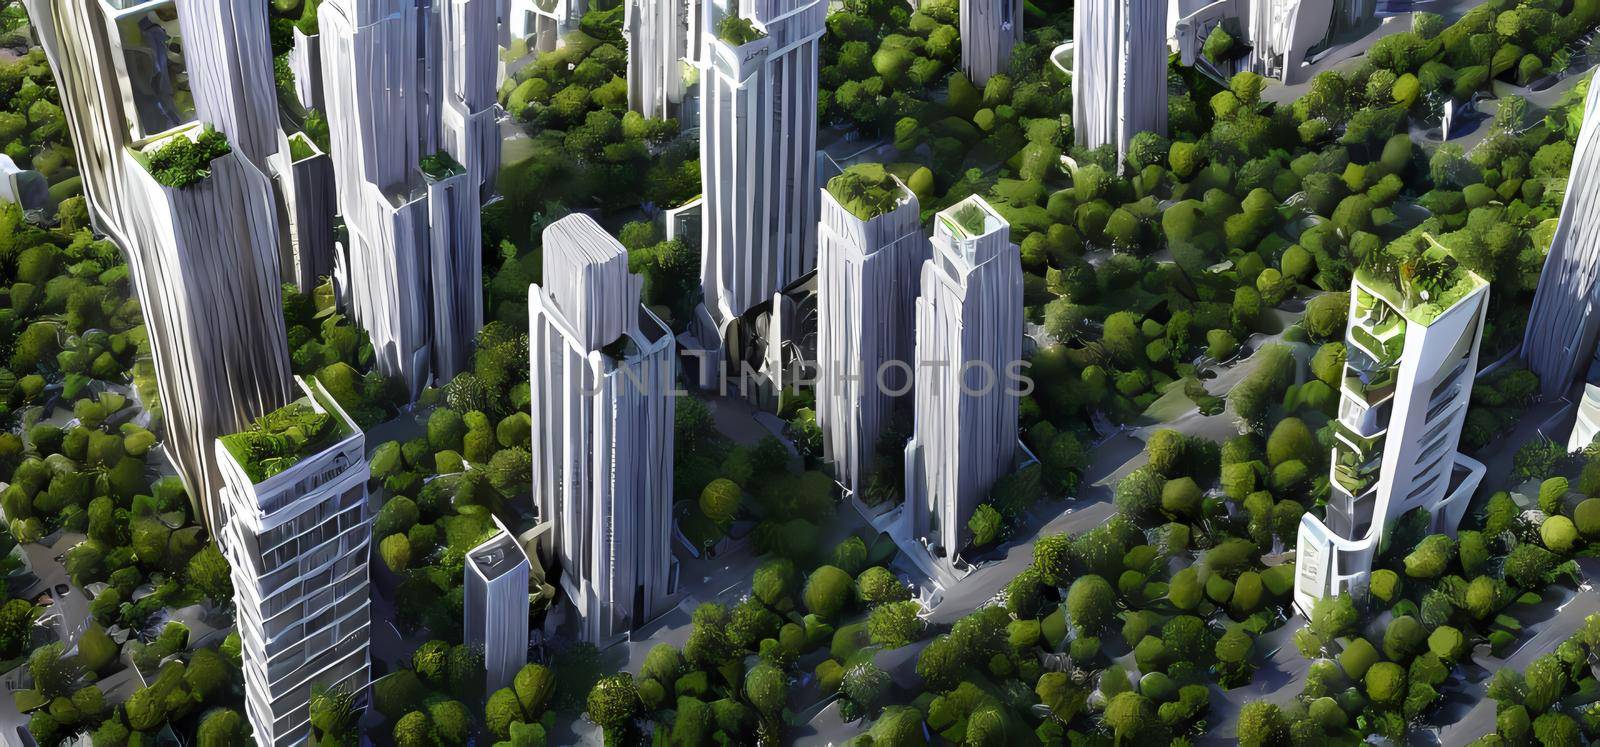 Abstract green city with high rise buildings and terraces covered in vegetation, for environmental architecture backgroundsDigital art painting for book illustration,background wallpaper, concept art. by yay_lmrb